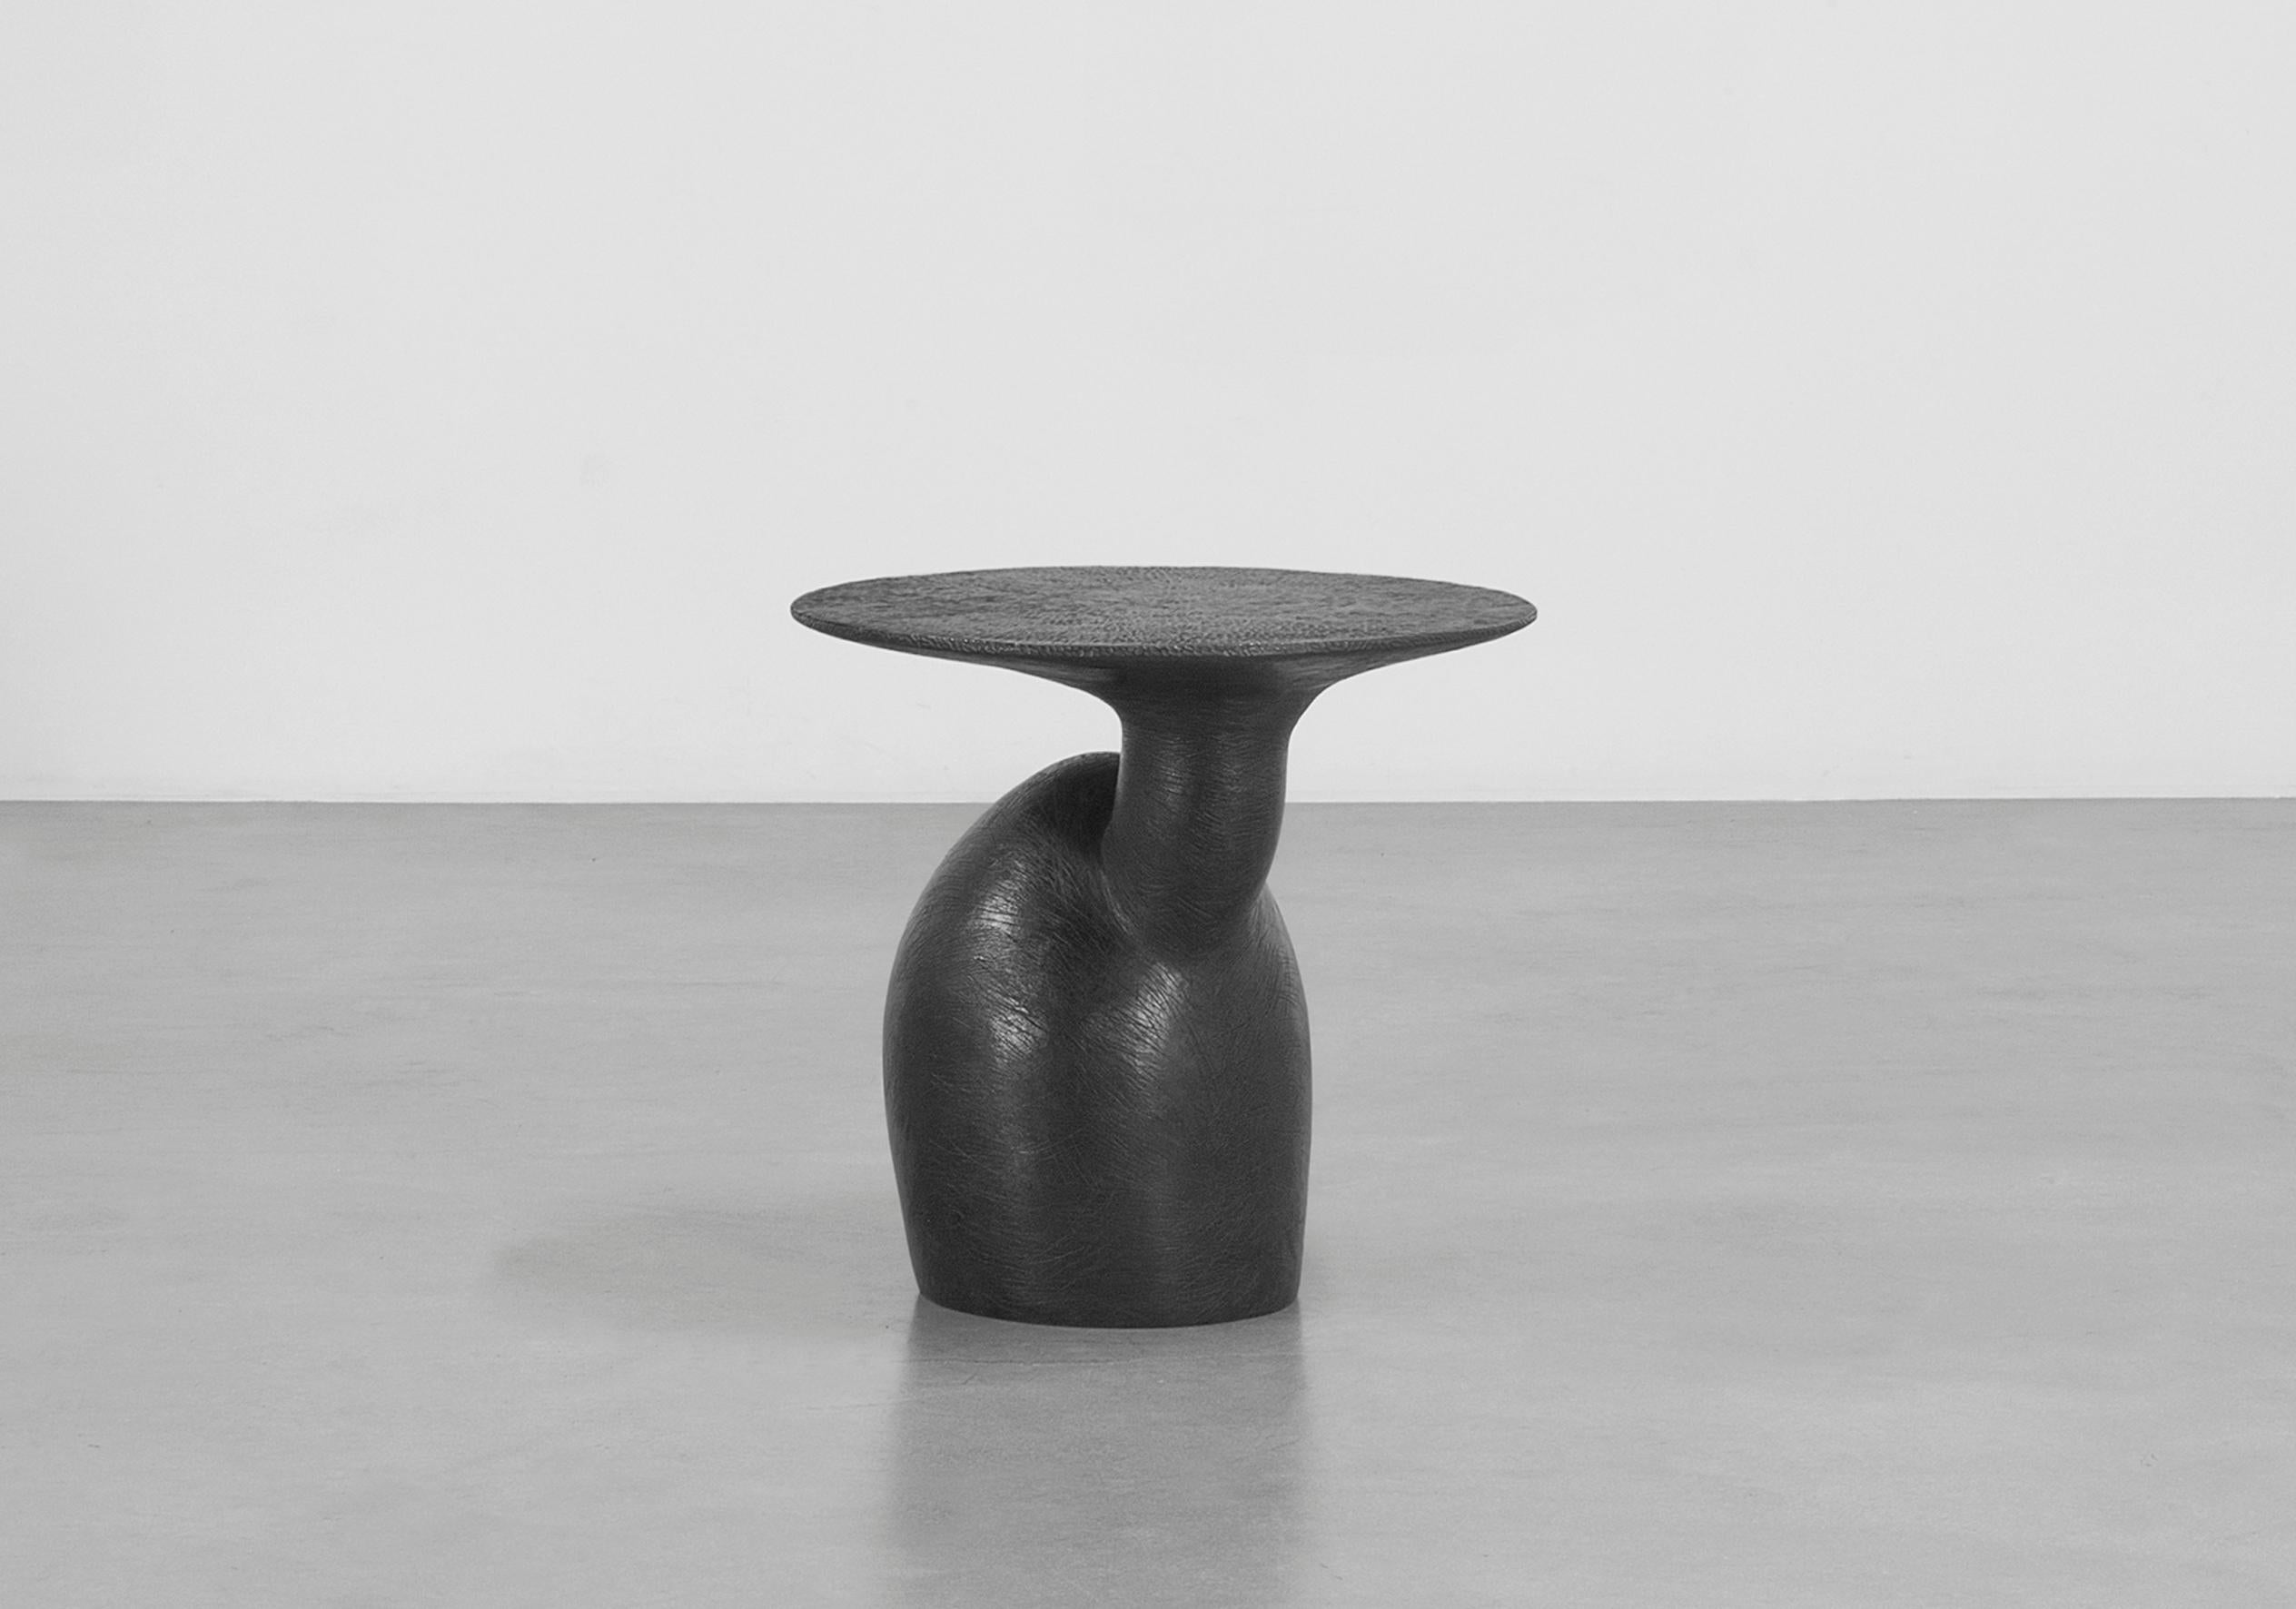 Wendell castle [American, 1932-2018] 
Promises, 2015
Bronze
Measures: 21 x 21.75 x 21.75 inches
53 x 55 x 55 cm
Edition of 8.